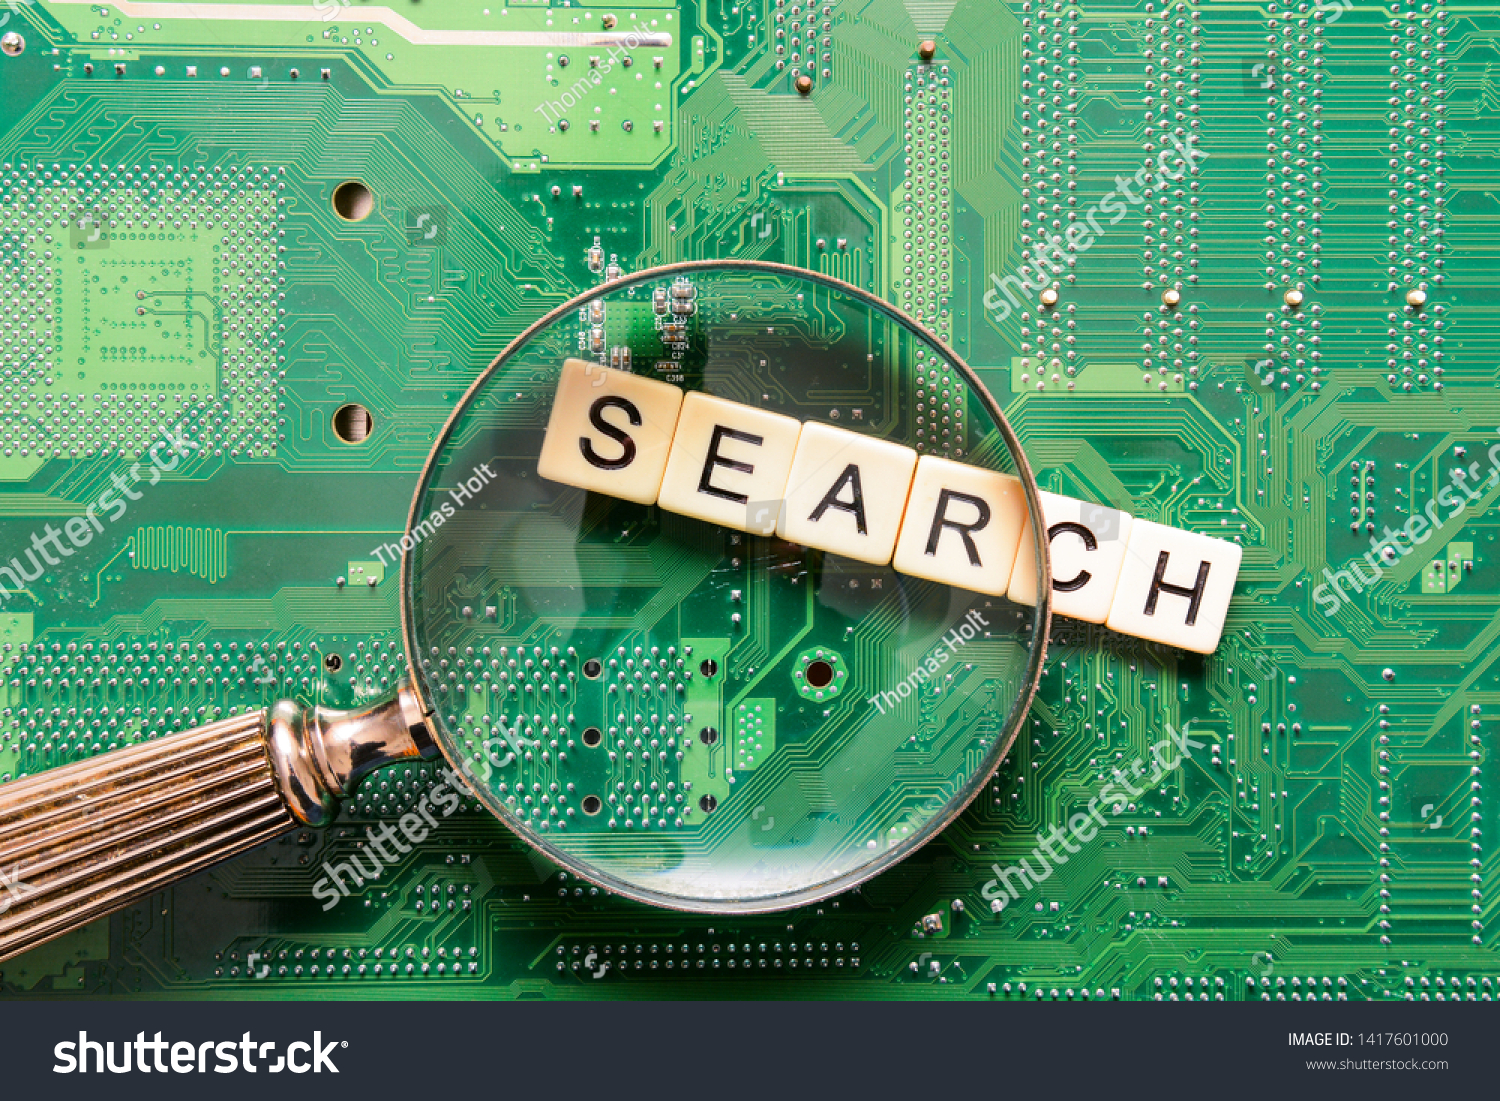 Search results from search engine query, searching the internet #1417601000